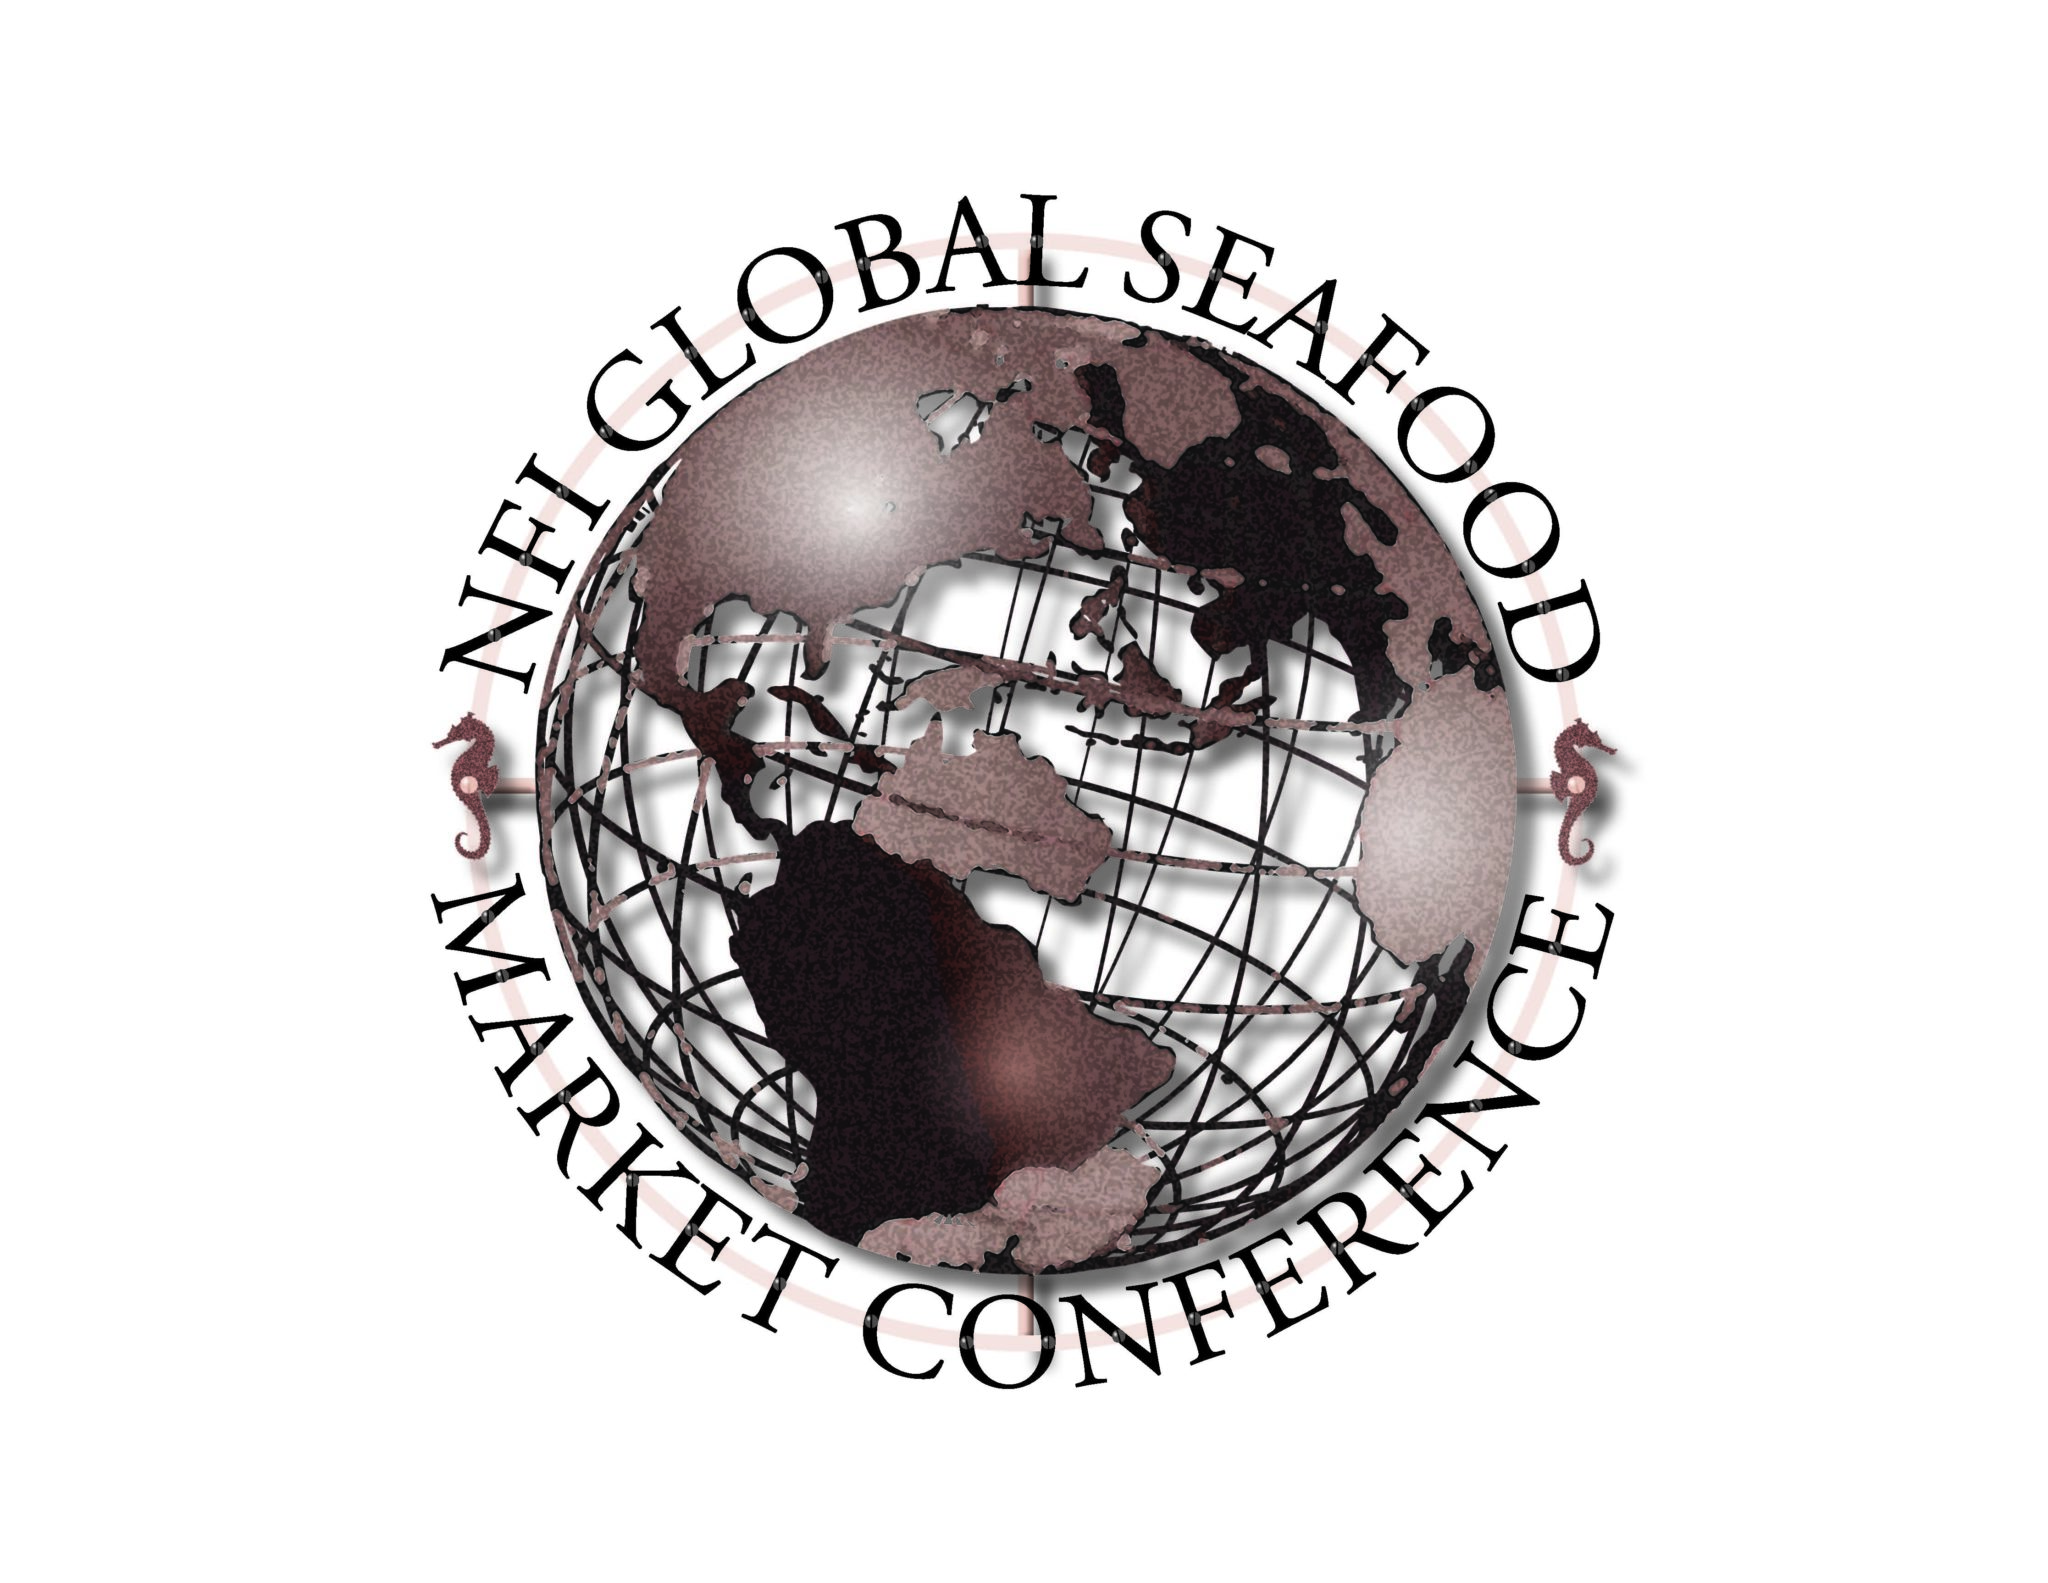 The Global Seafood Market Conference Makes Its West Coast Return in